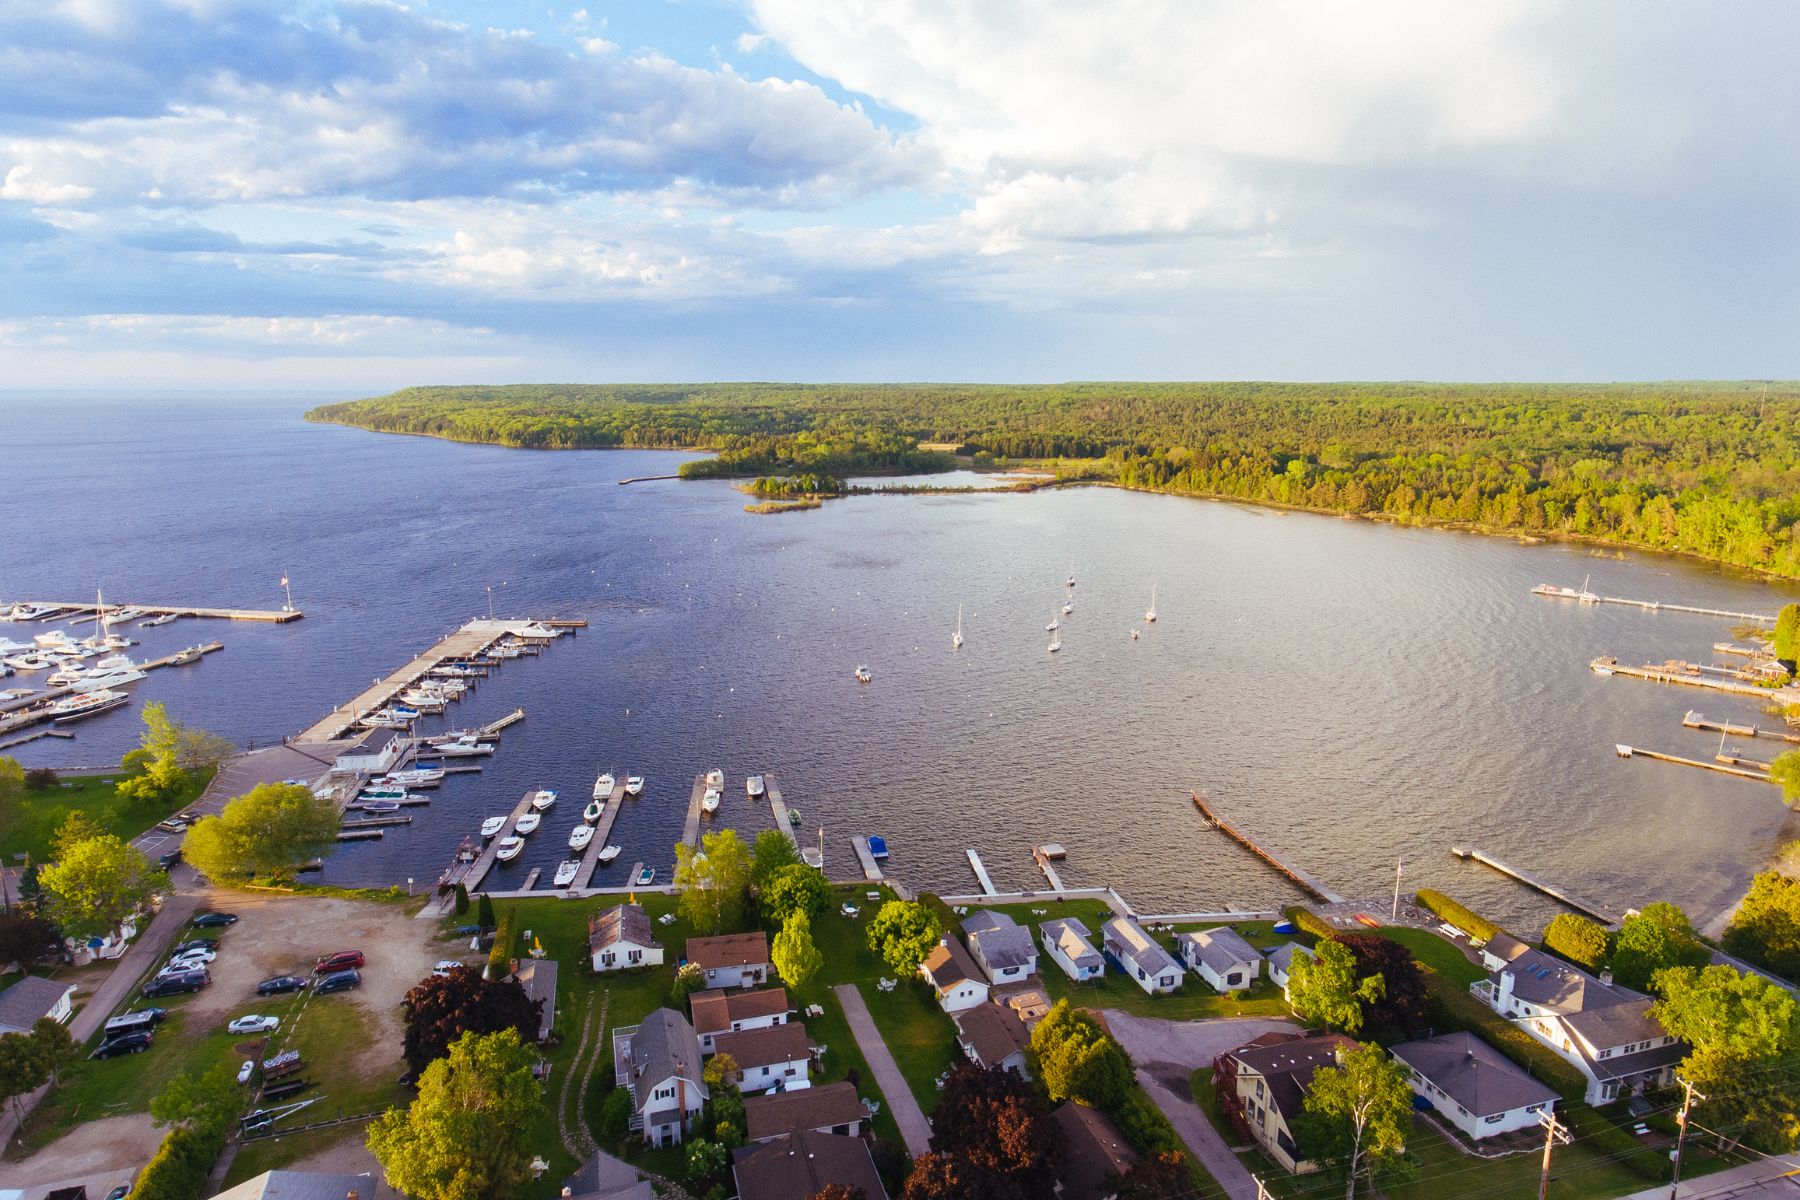 10 Ways to Explore All the Best Things to Do in Door County